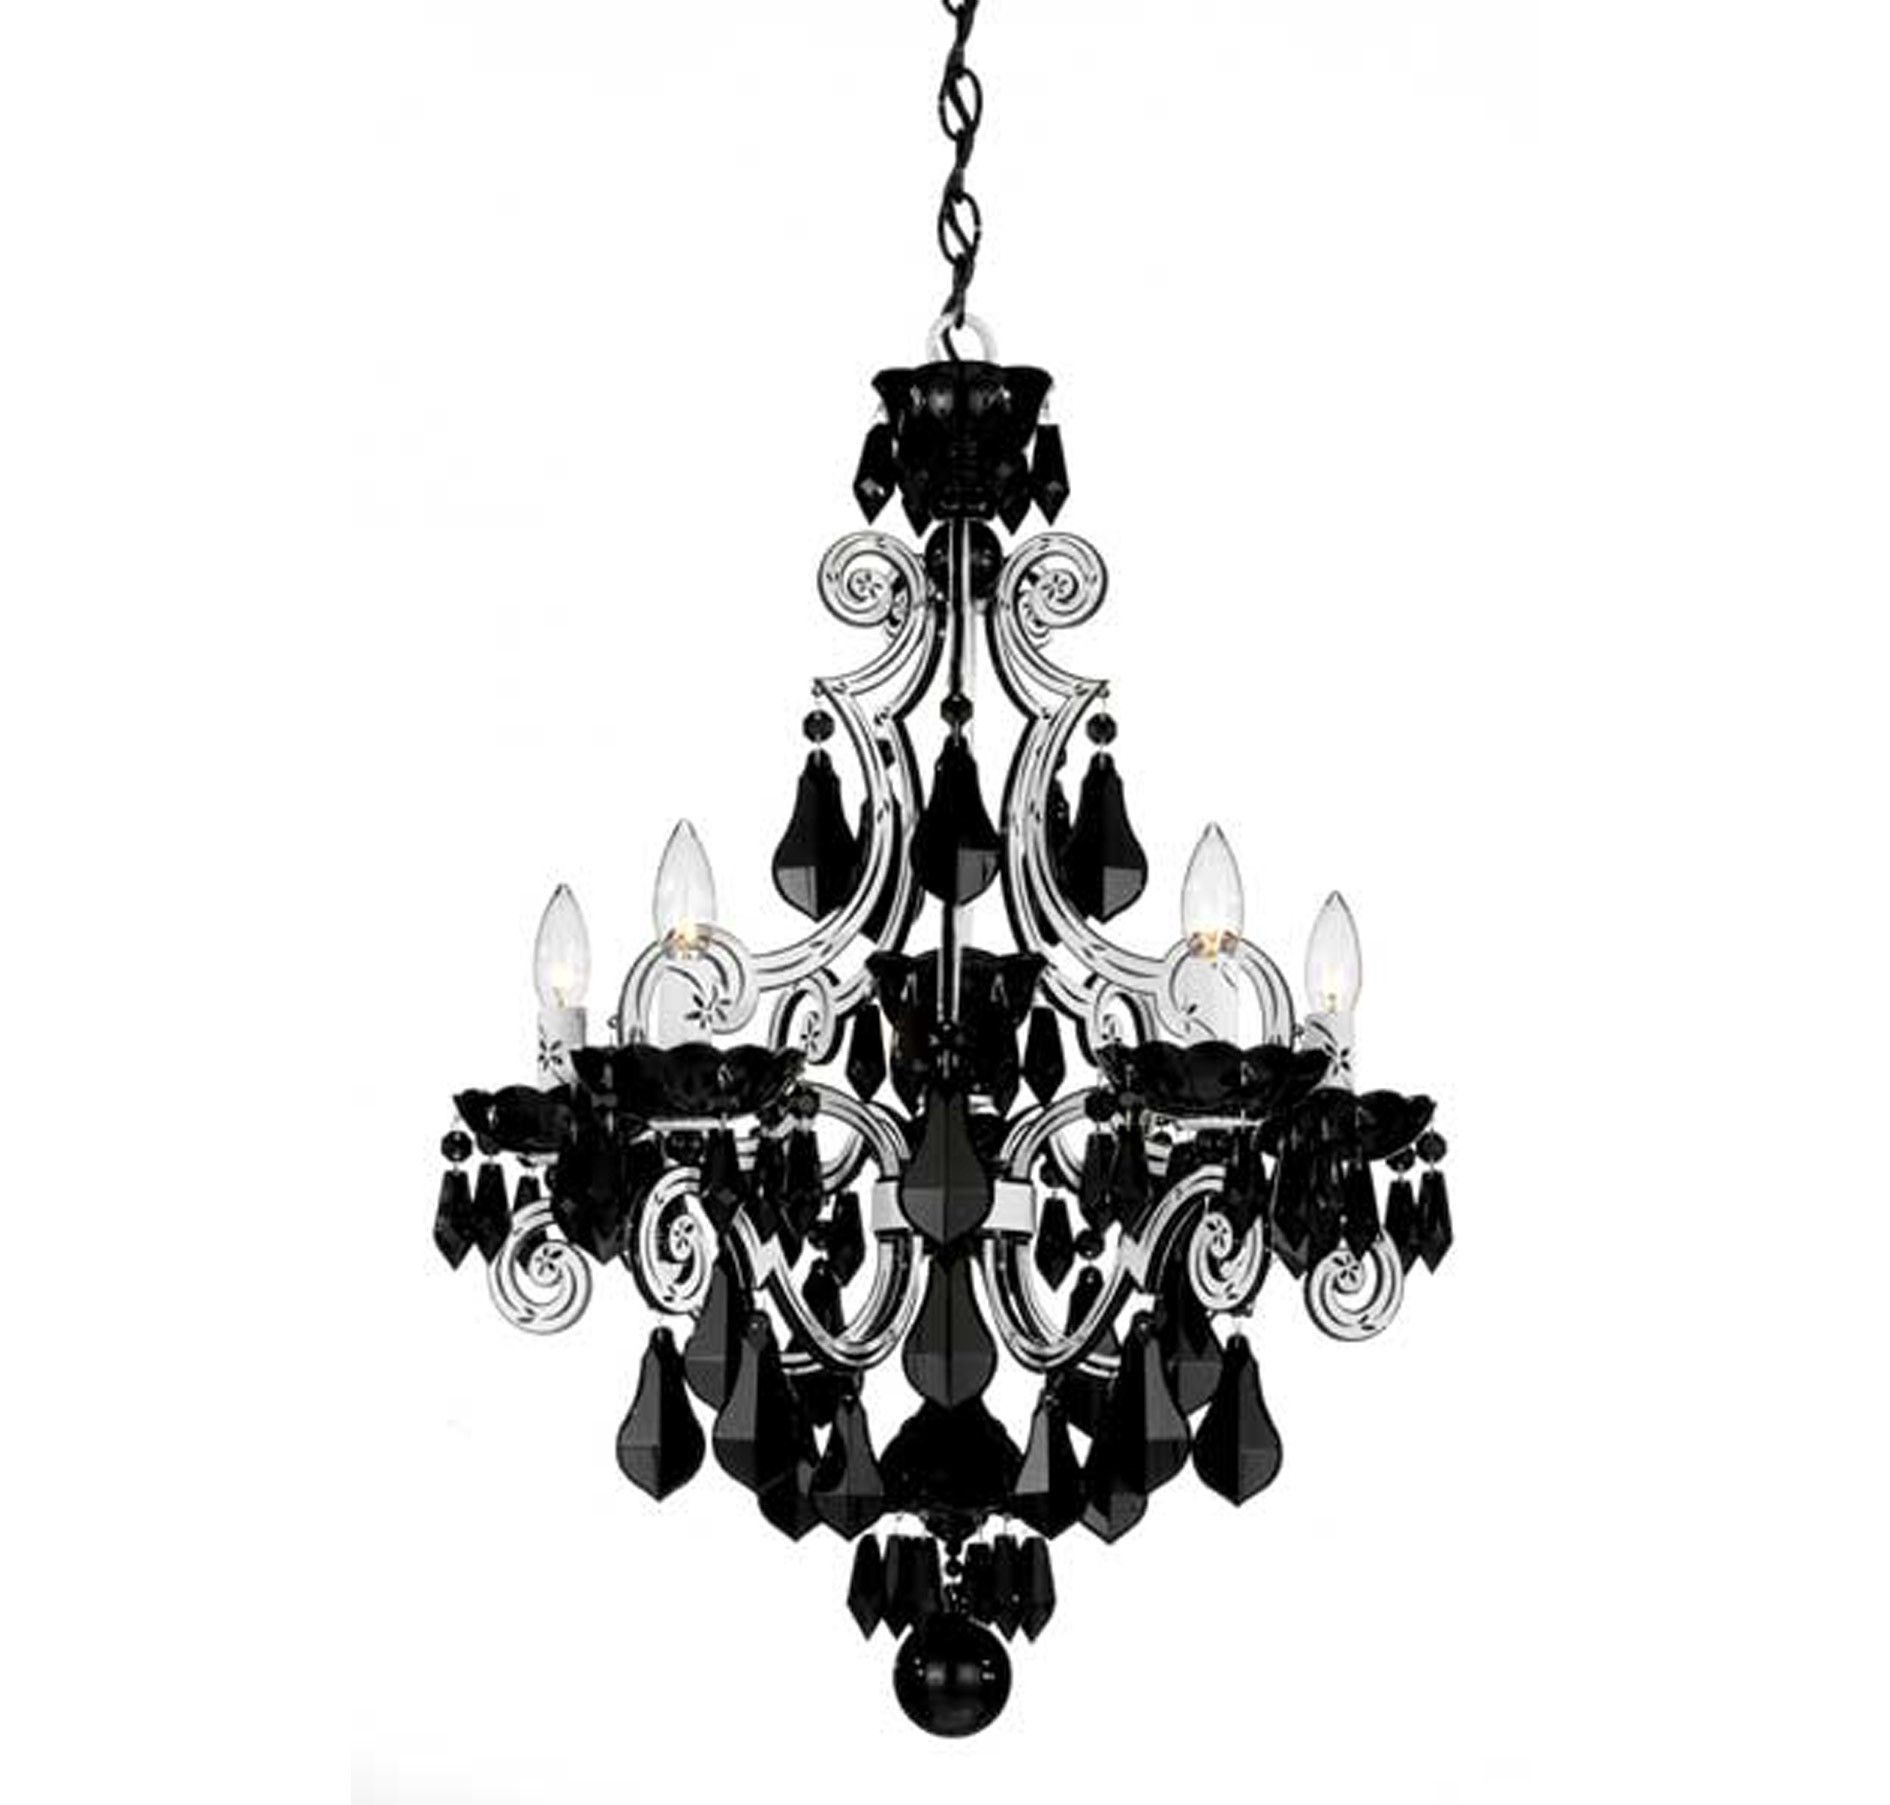 Furniture Beautiful Chandeliers Target For Lighting And Ceiling Throughout Black Glass Chandeliers (View 14 of 15)